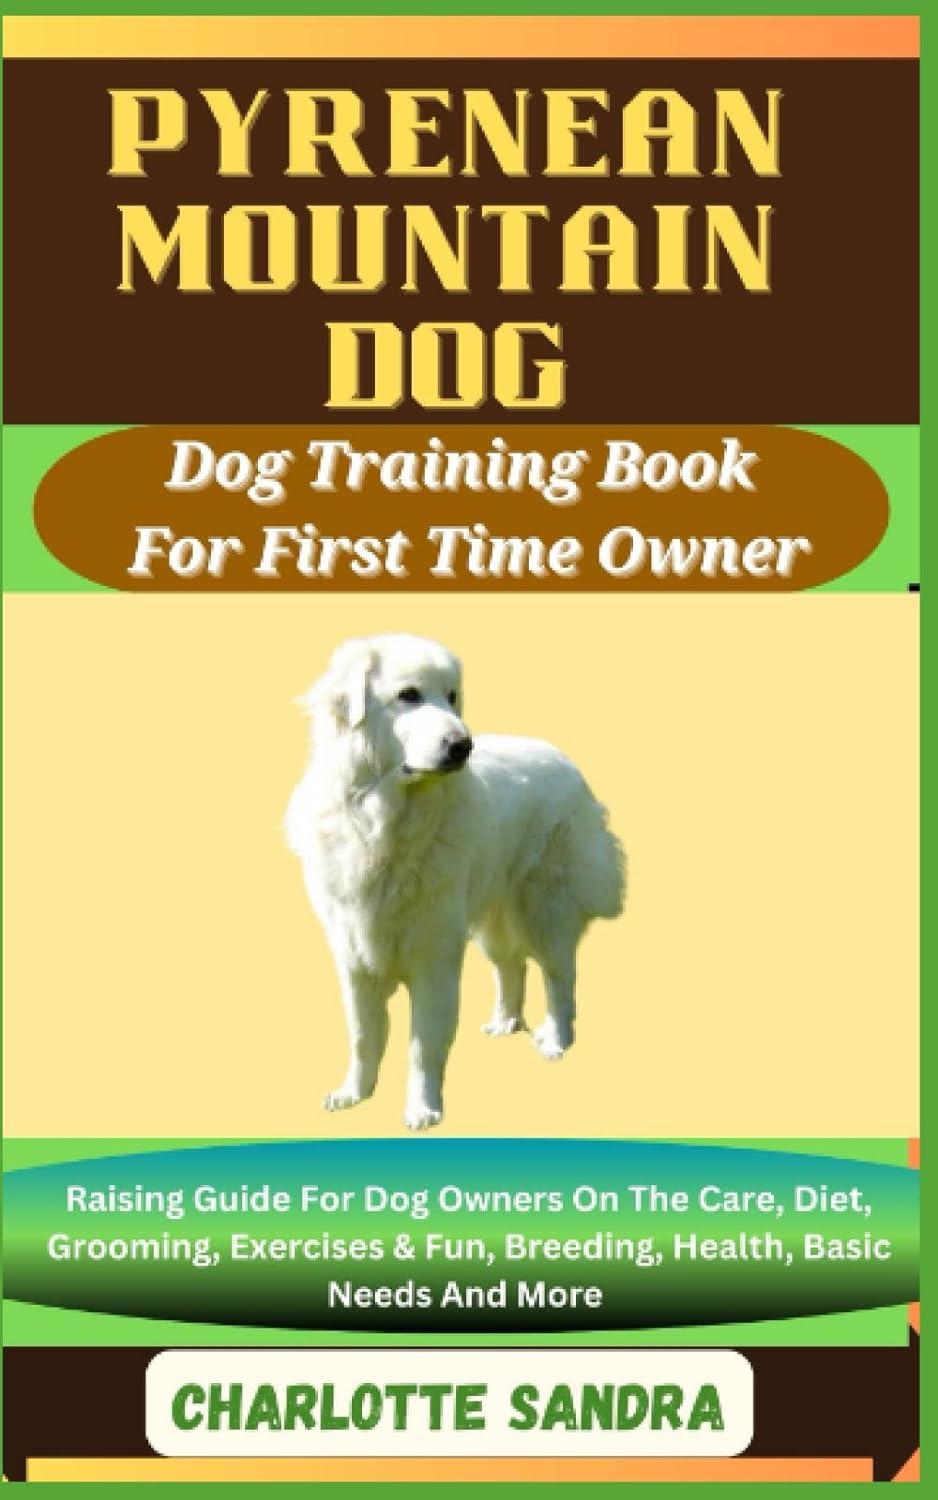 pyrenean mountain dog training book for first time owner raising guide for dog owners on the care diet